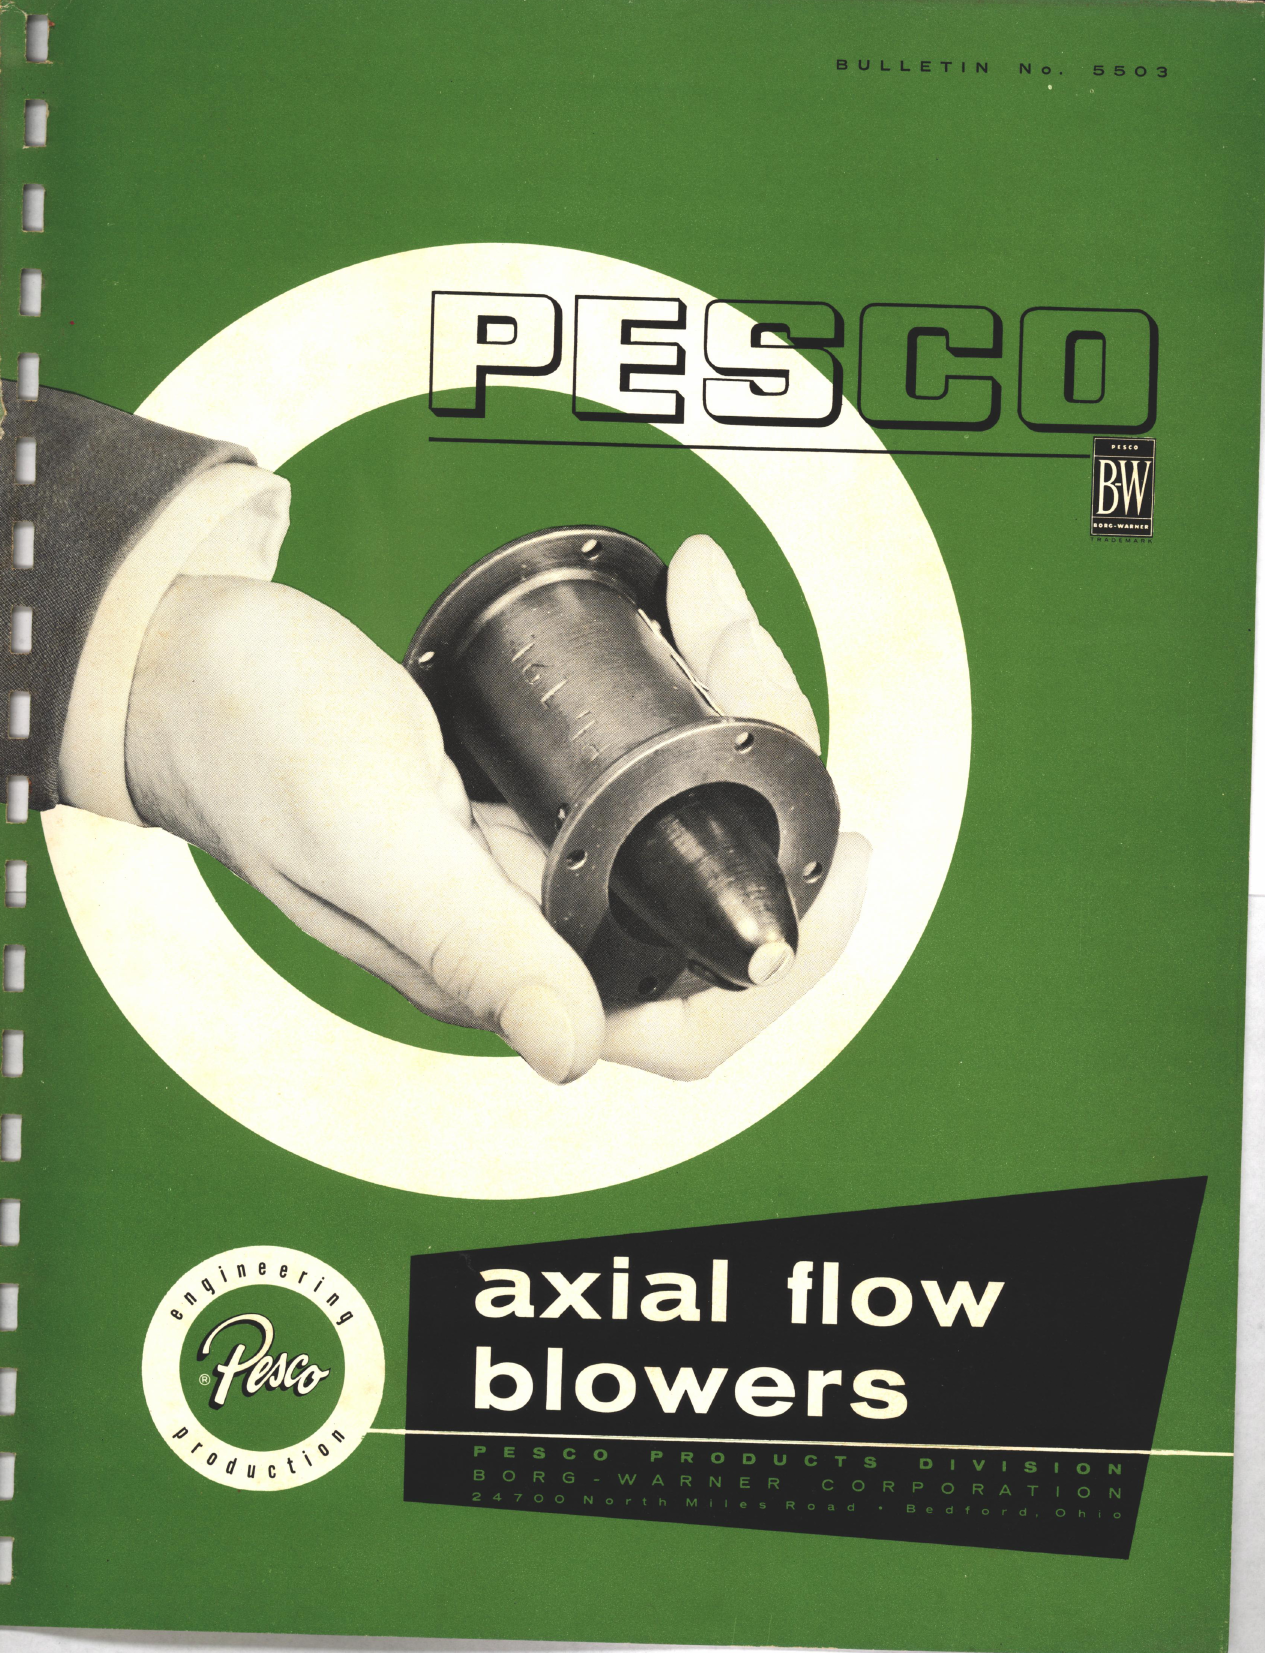 Sample page 1 from AirCorps Library document: Pesco Axial Flow Blowers